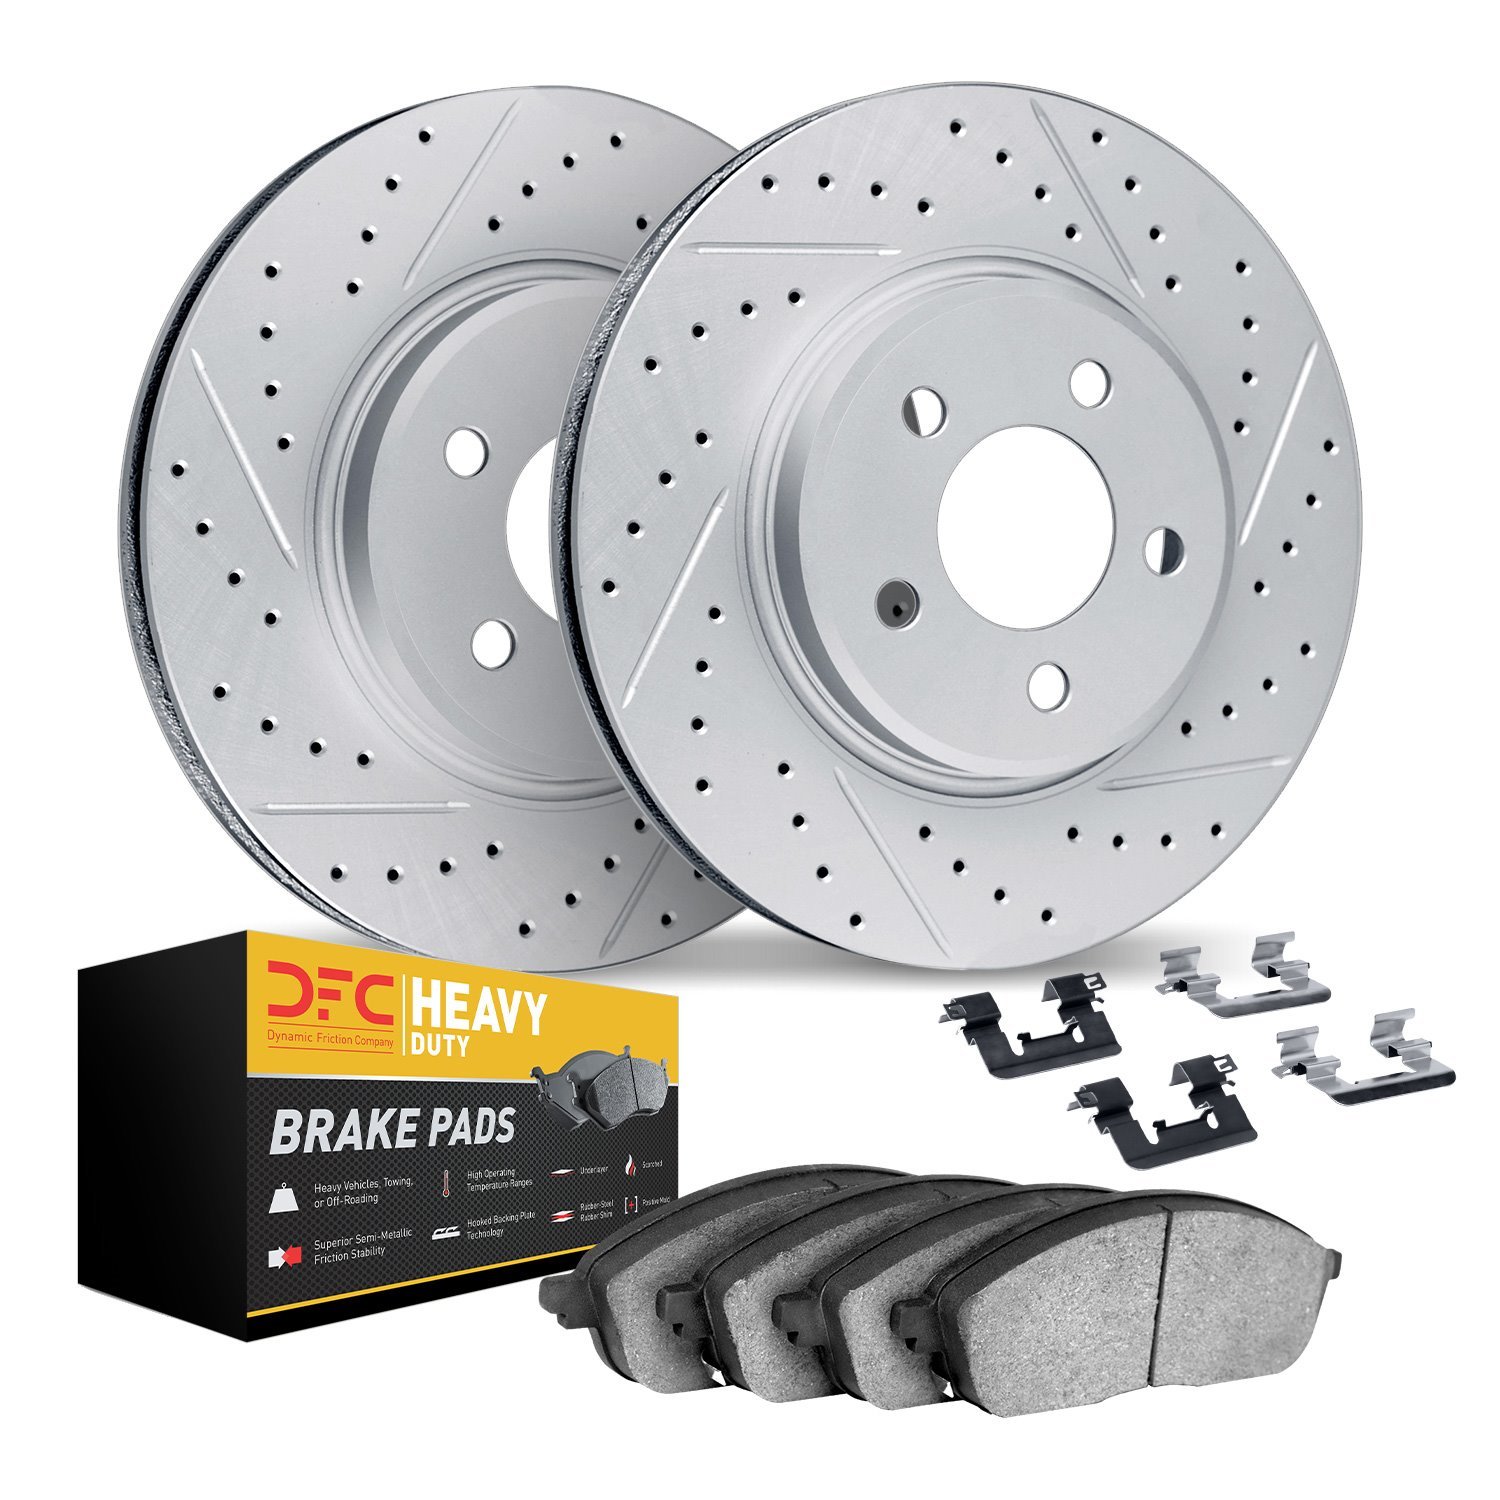 2212-99074 Geoperformance Drilled/Slotted Rotors w/Heavy-Duty Pads Kit & Hardware, 1976-1985 Ford/Lincoln/Mercury/Mazda, Positio